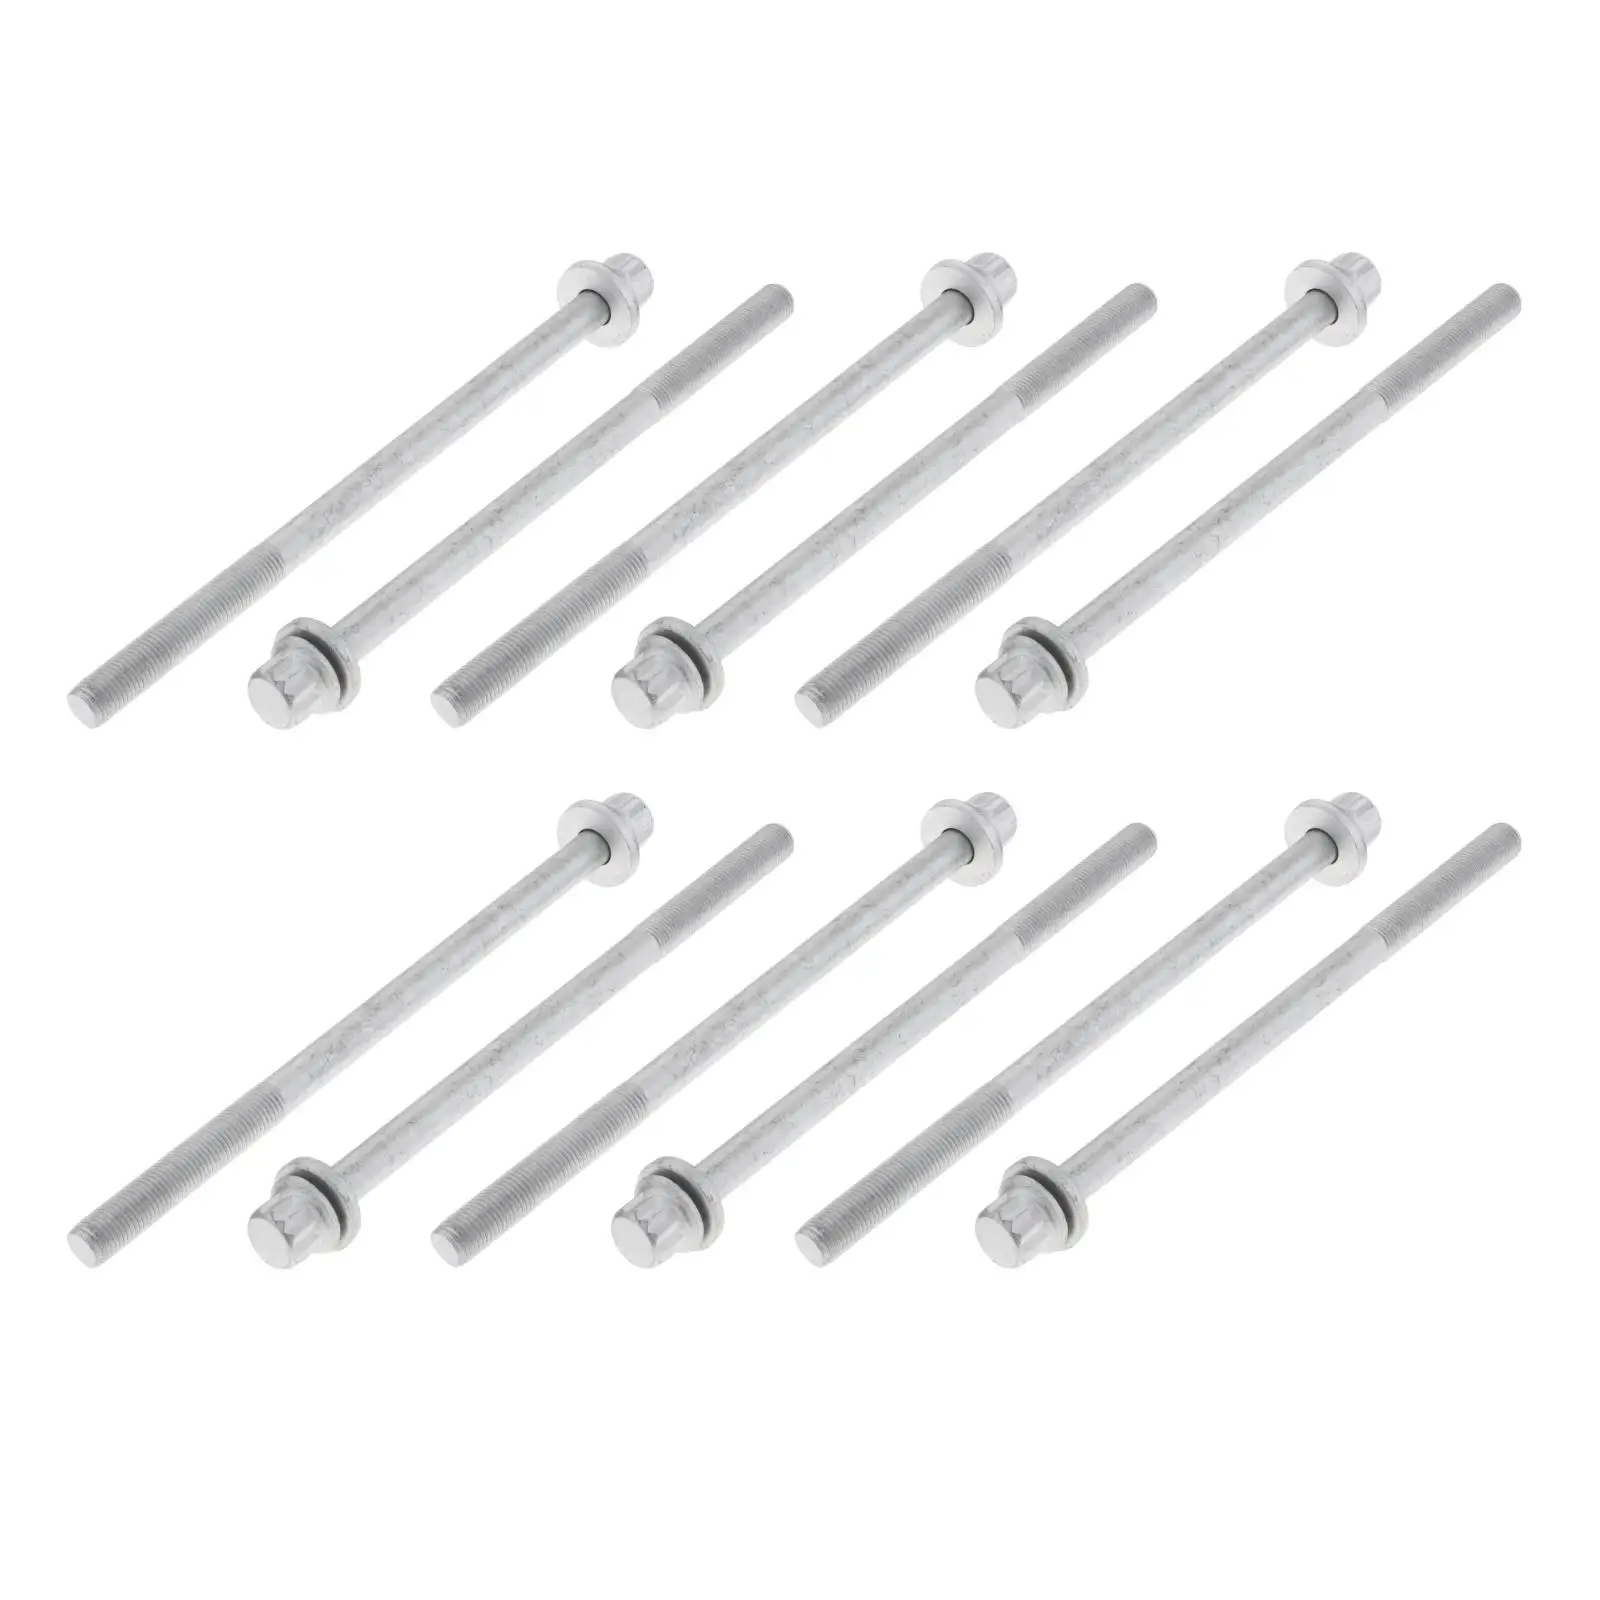 Head Bolts Kit 11095AA123 11095AA141 12x Screws Fits for 99 -12 Impreza and Forester (Non-Turbo) 99-09 Replace